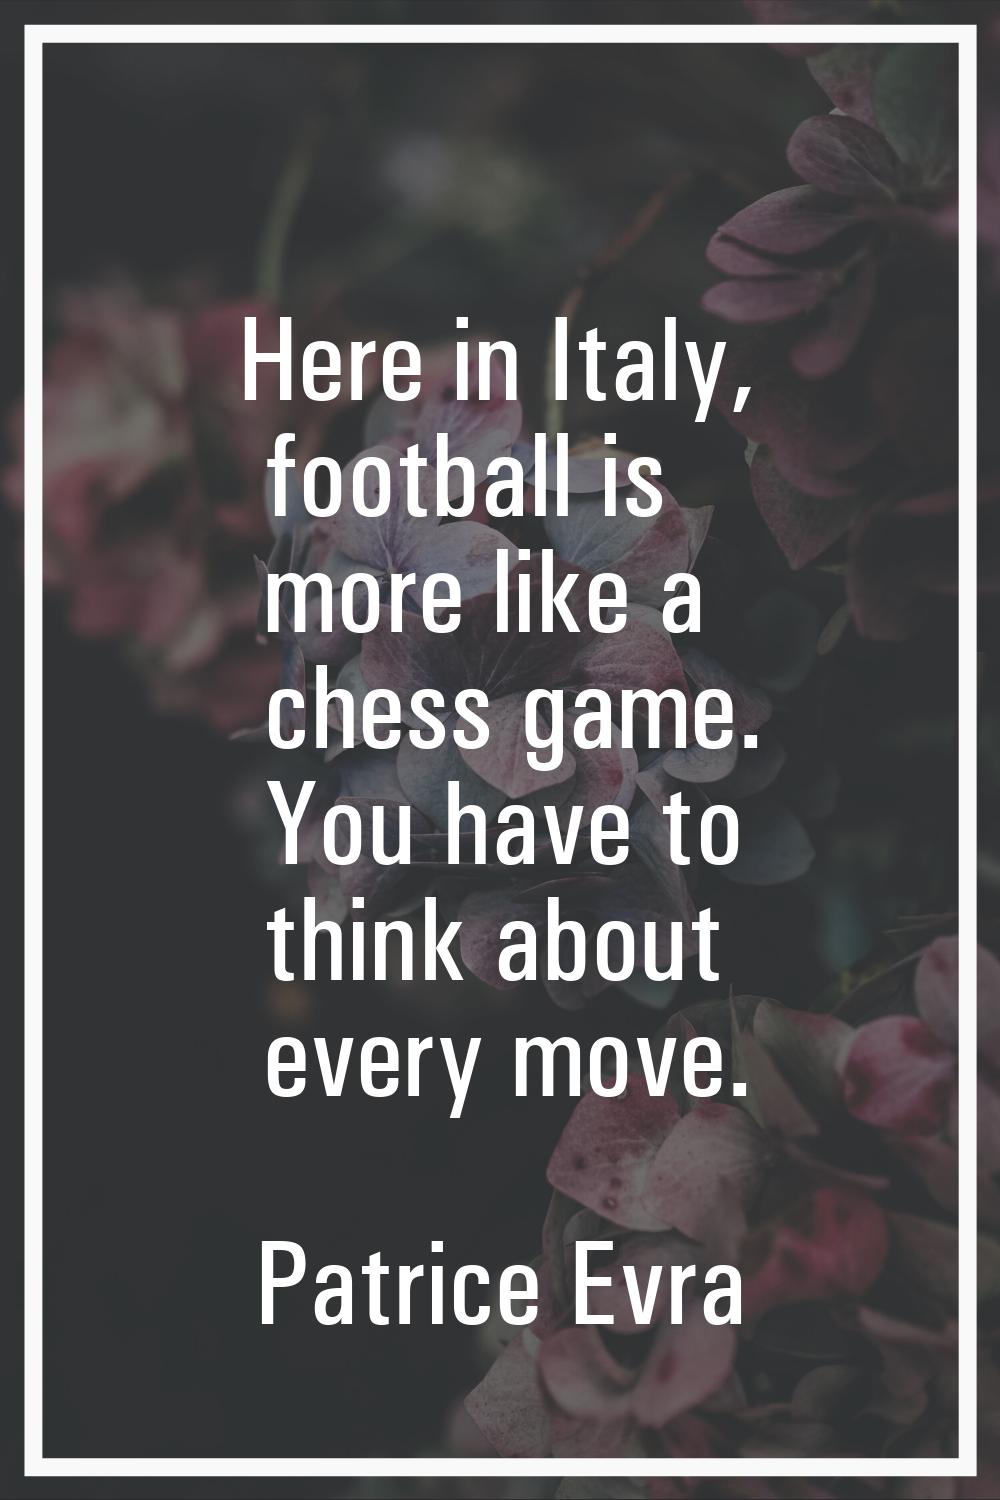 Here in Italy, football is more like a chess game. You have to think about every move.